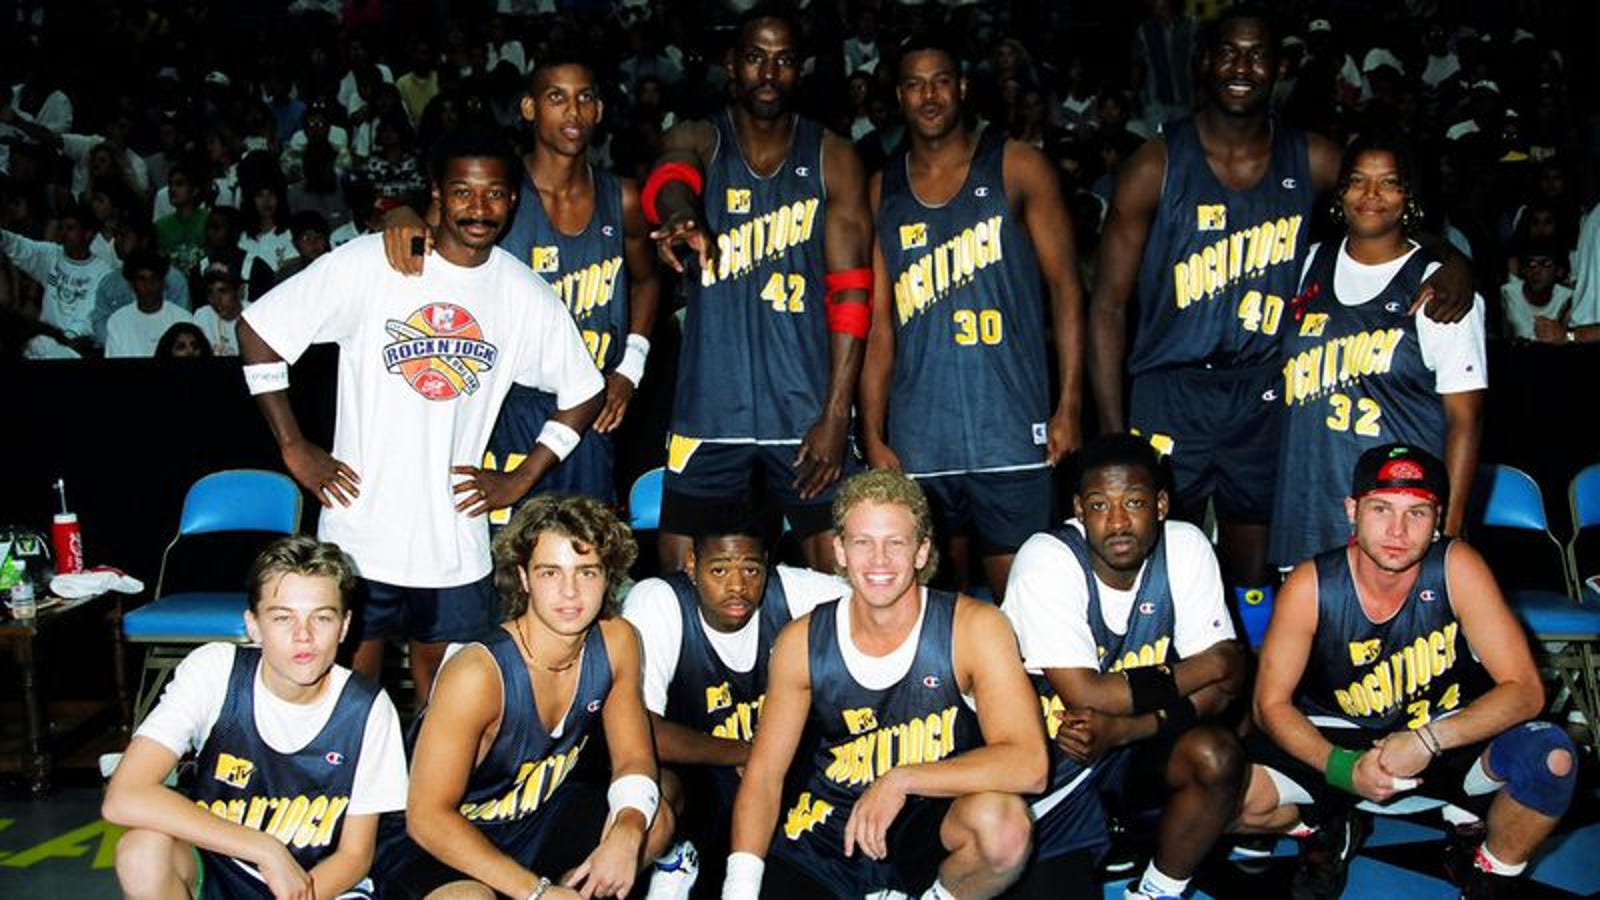 Read This Celebrate The 50 Point Basket With A History Of Rock N Jock Sports